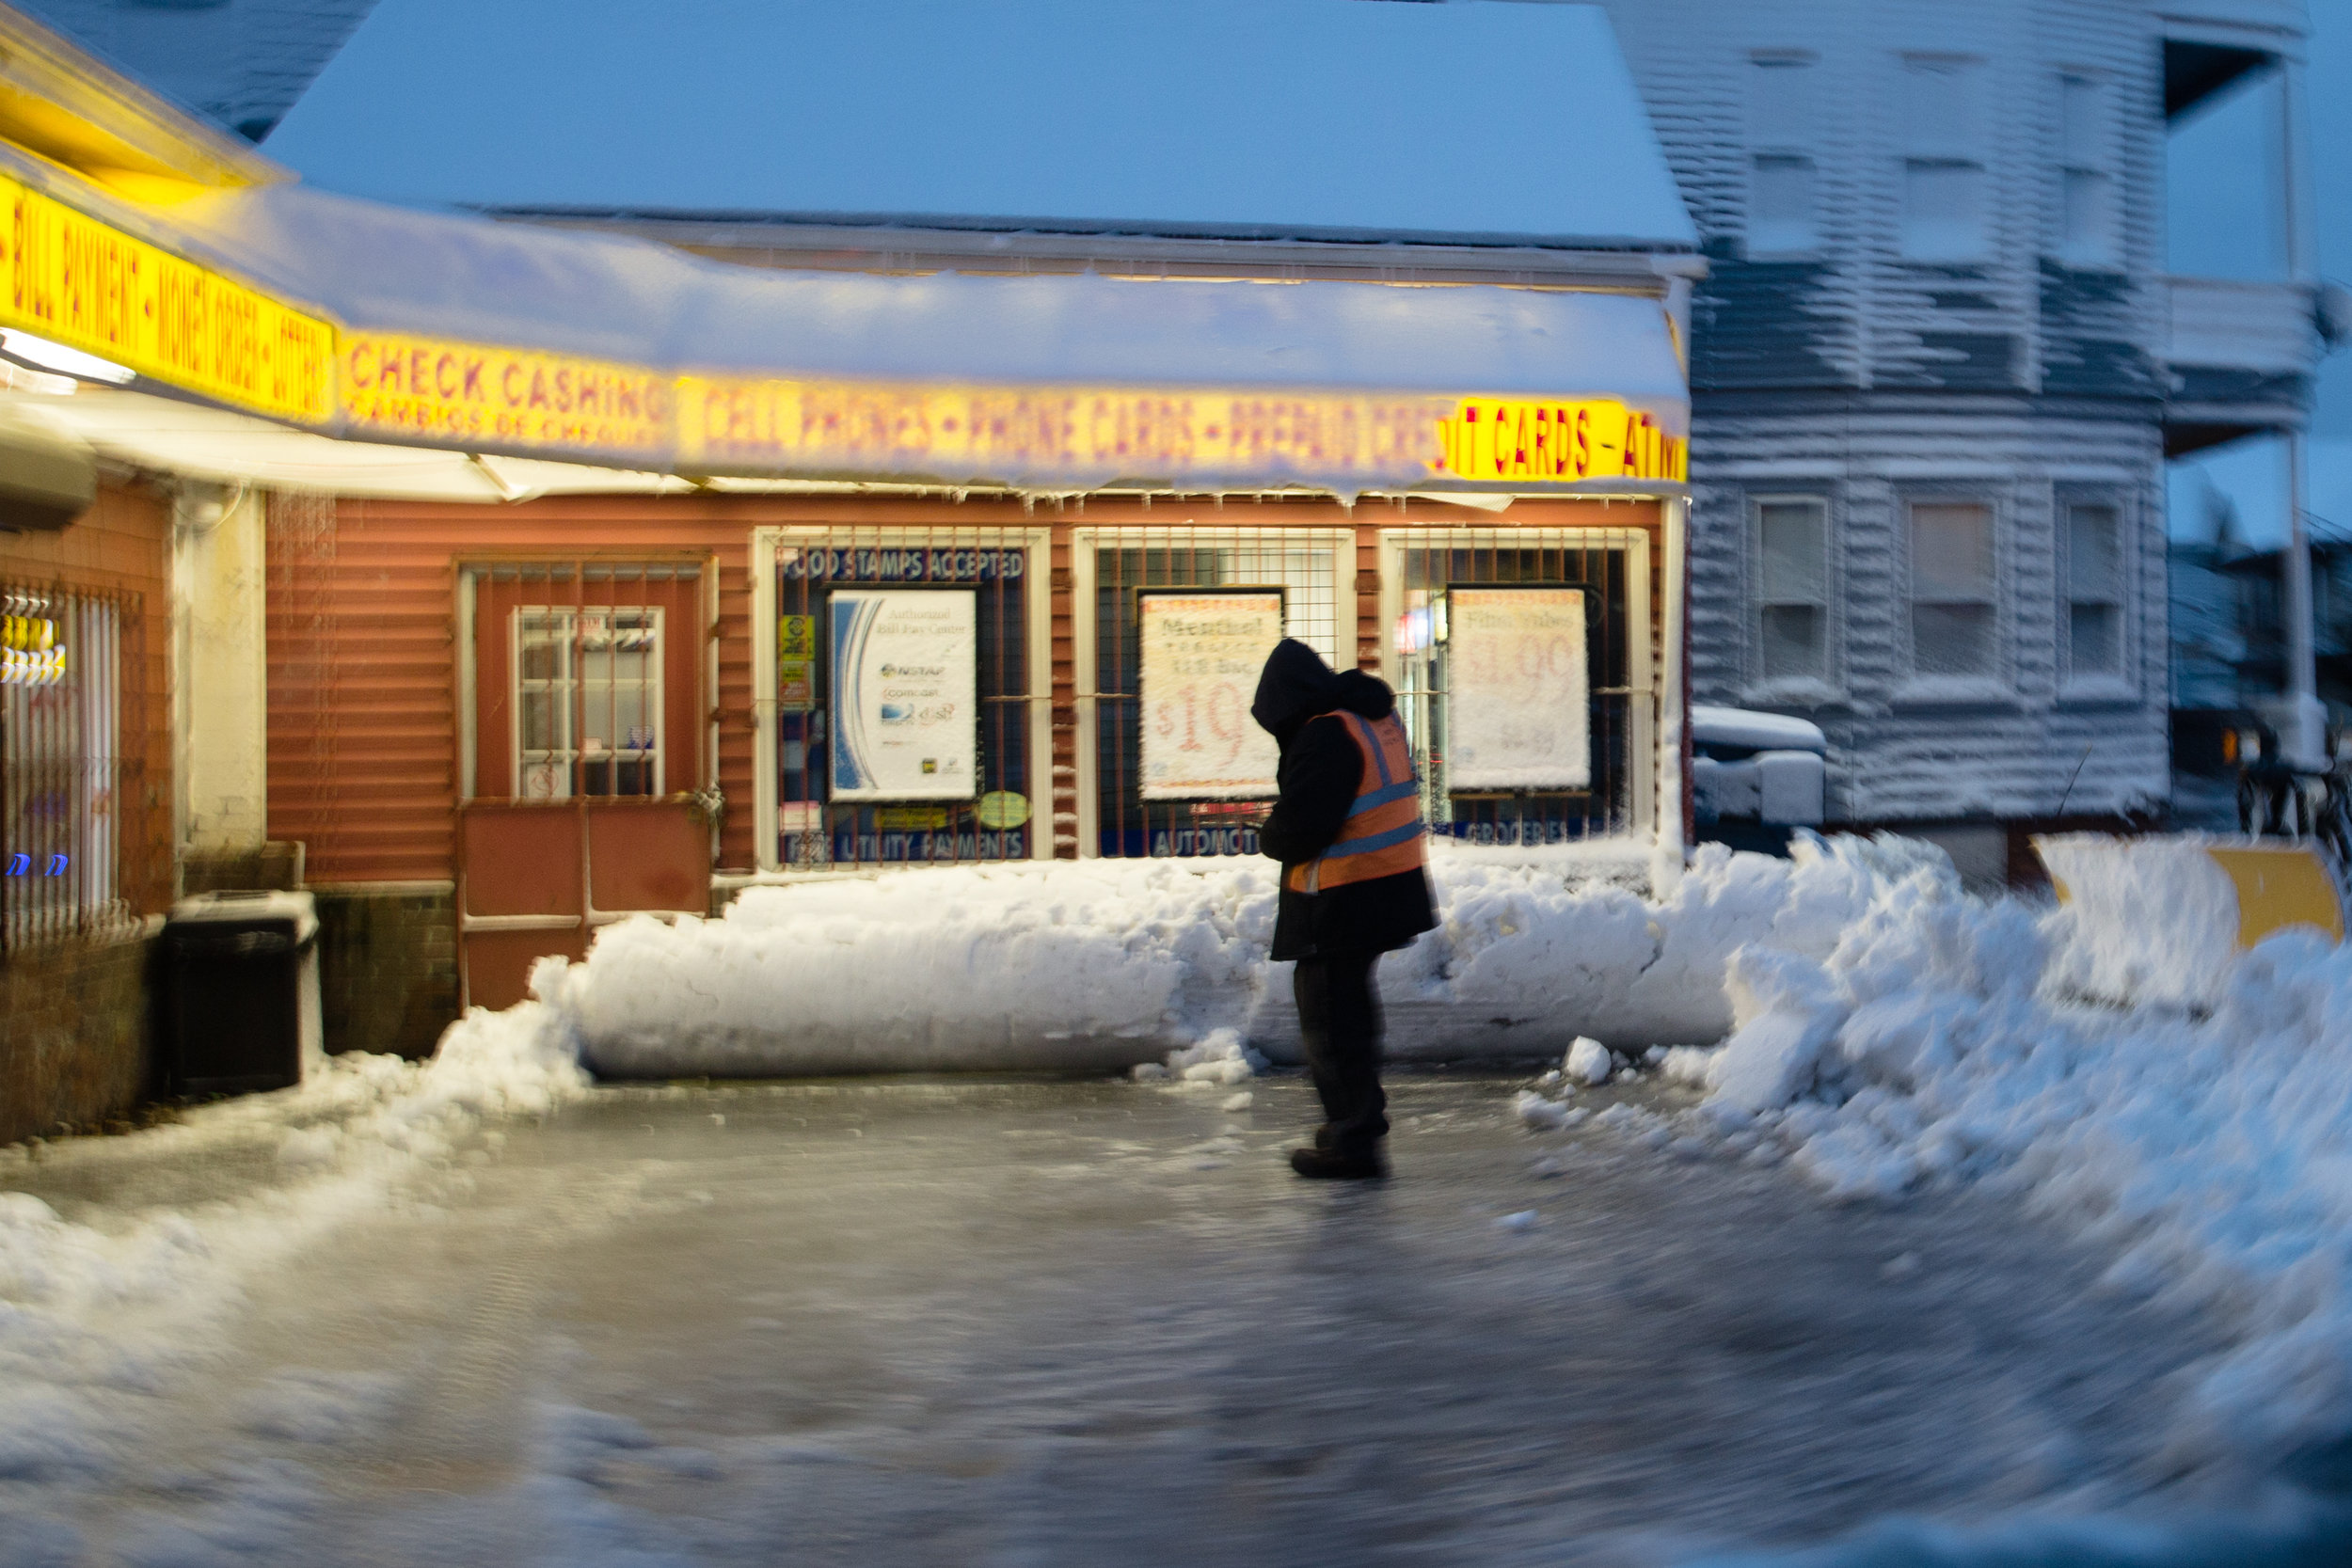  The morning after the blizzard. - New Bedford, MA 